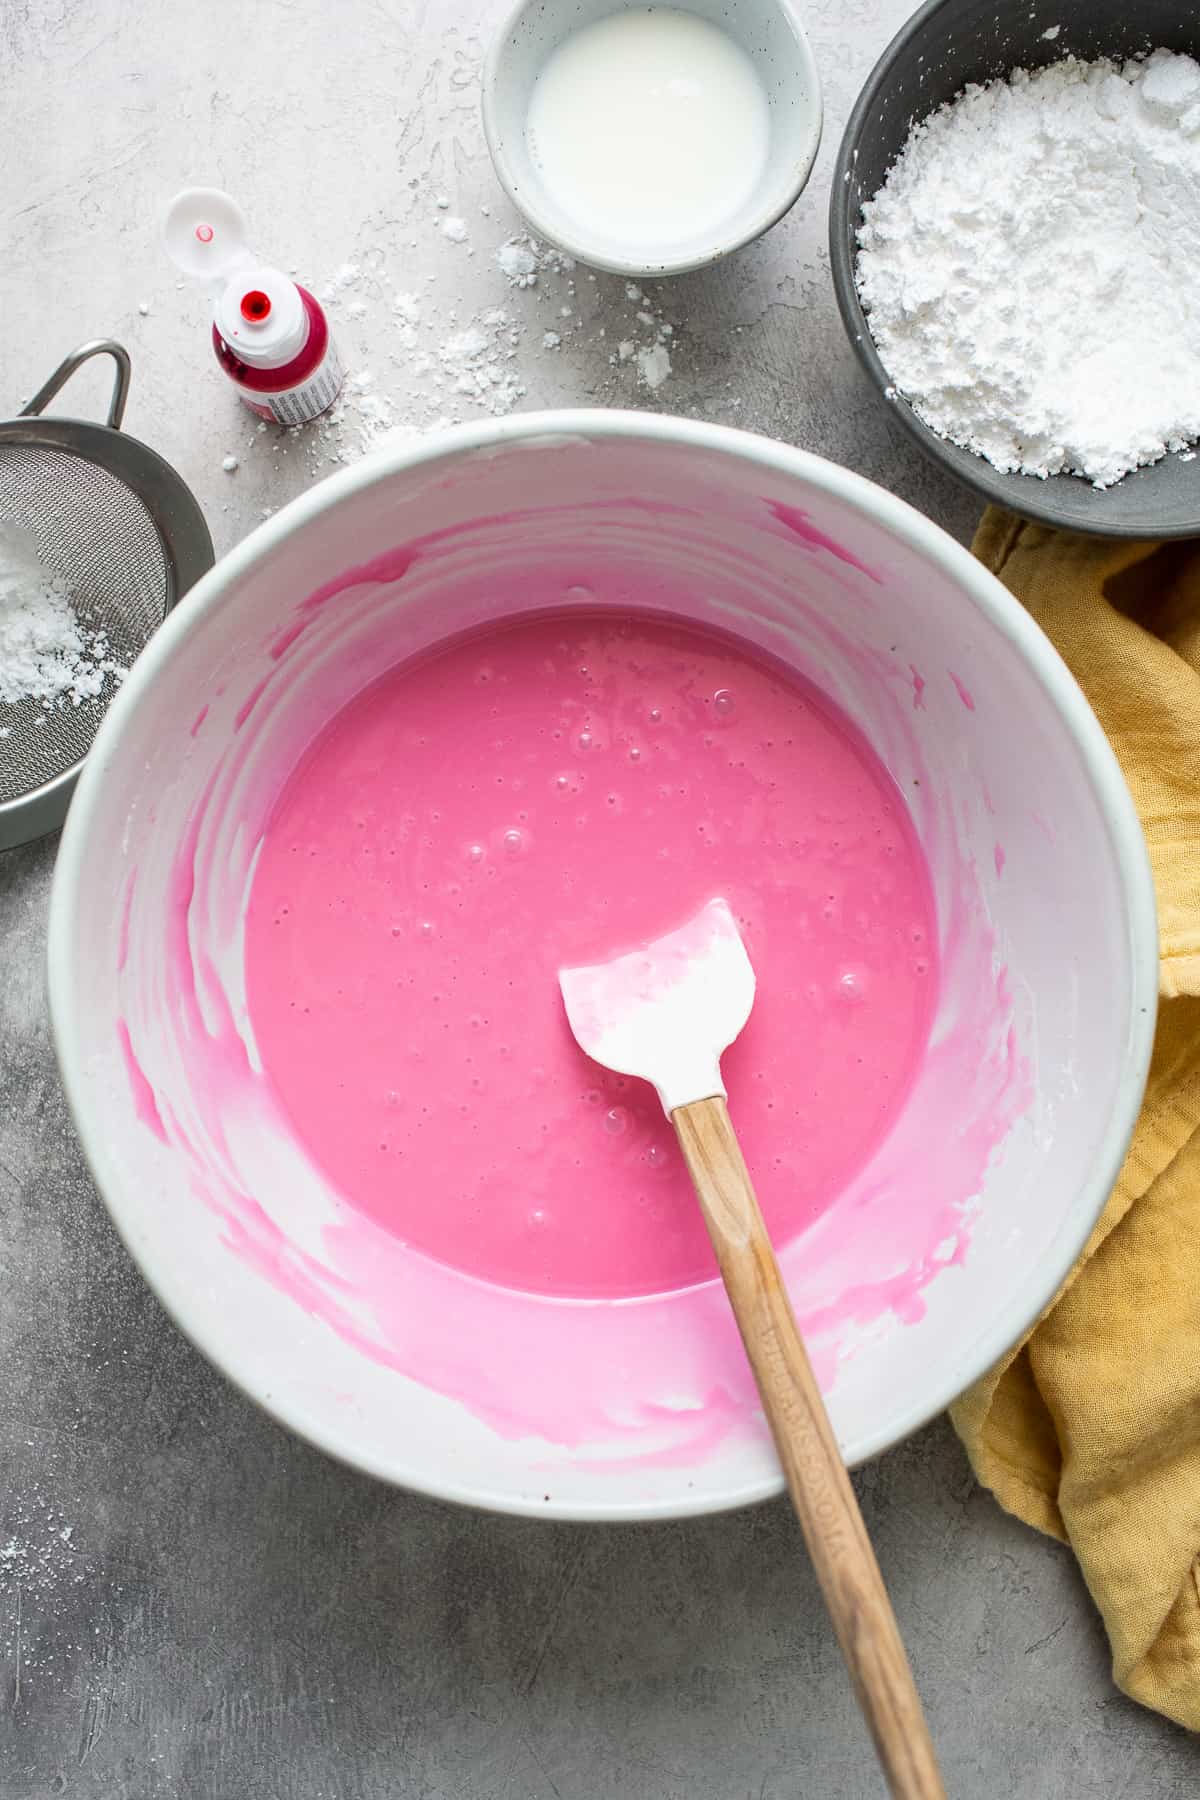 The cortadillo pink icing in a bowl ready to be spread.